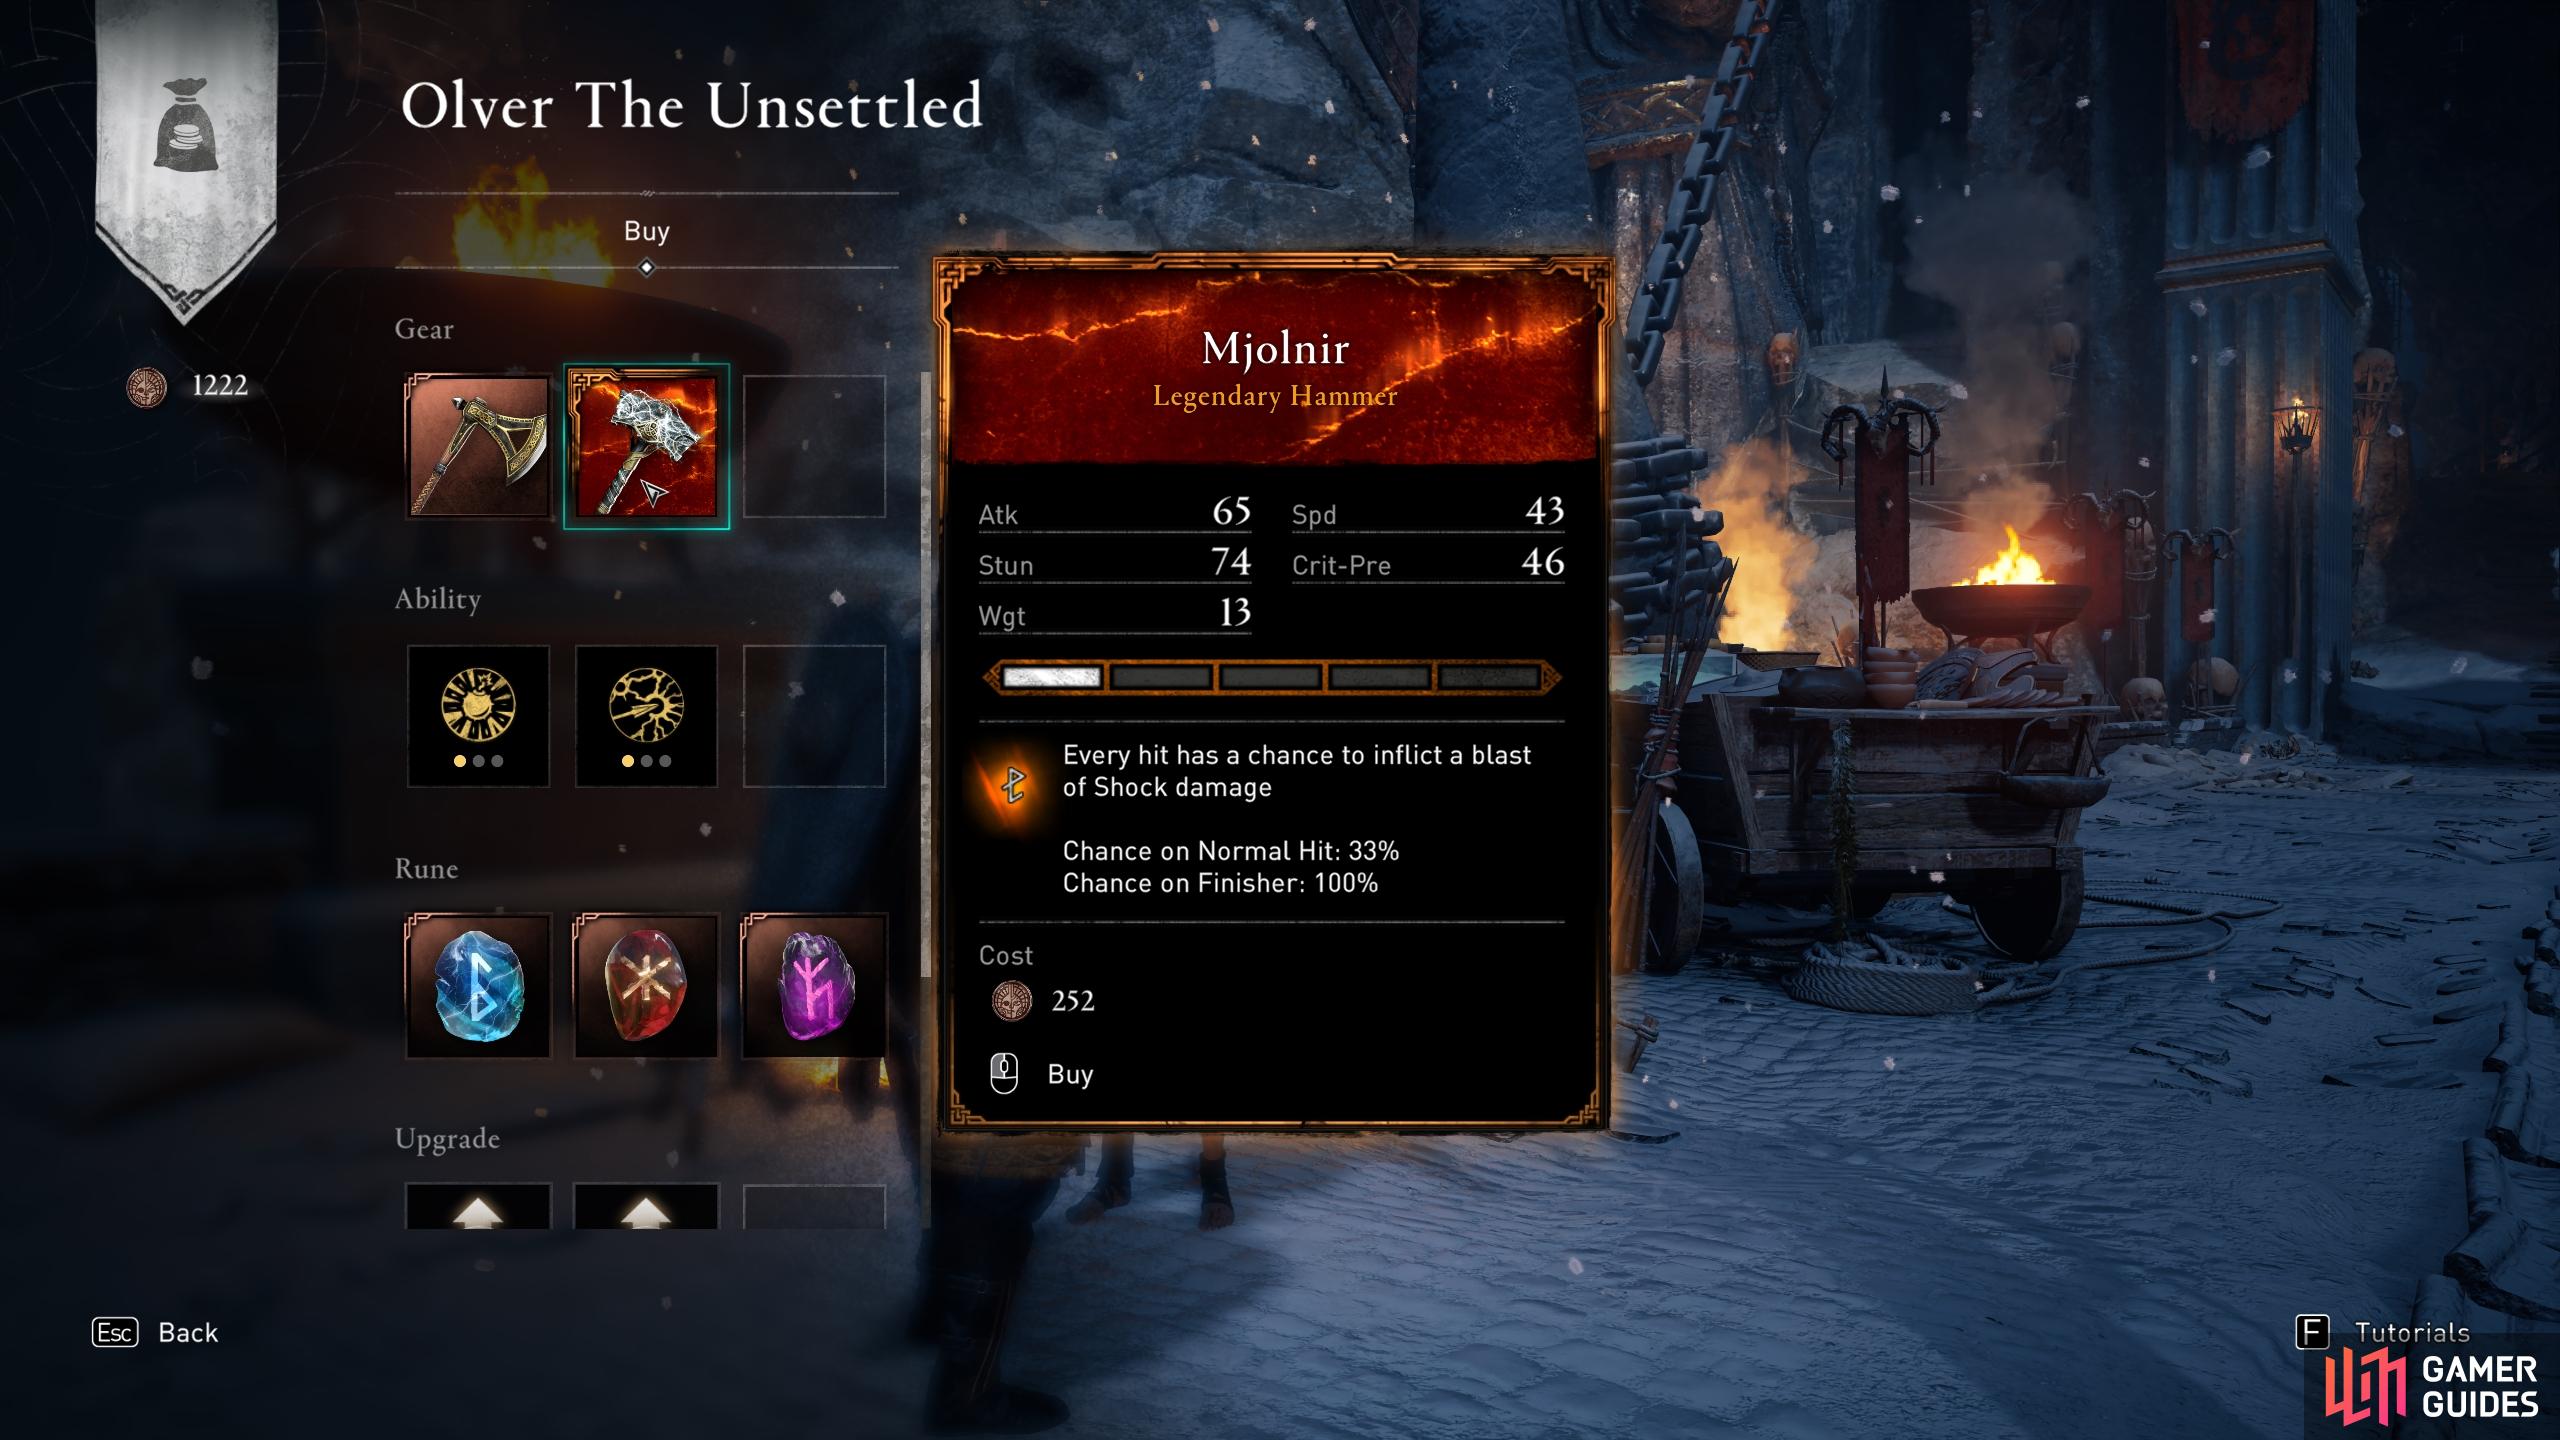 You can purchase powerful legendary weapons from merchants, and useful runes, abilities, and other upgrades.